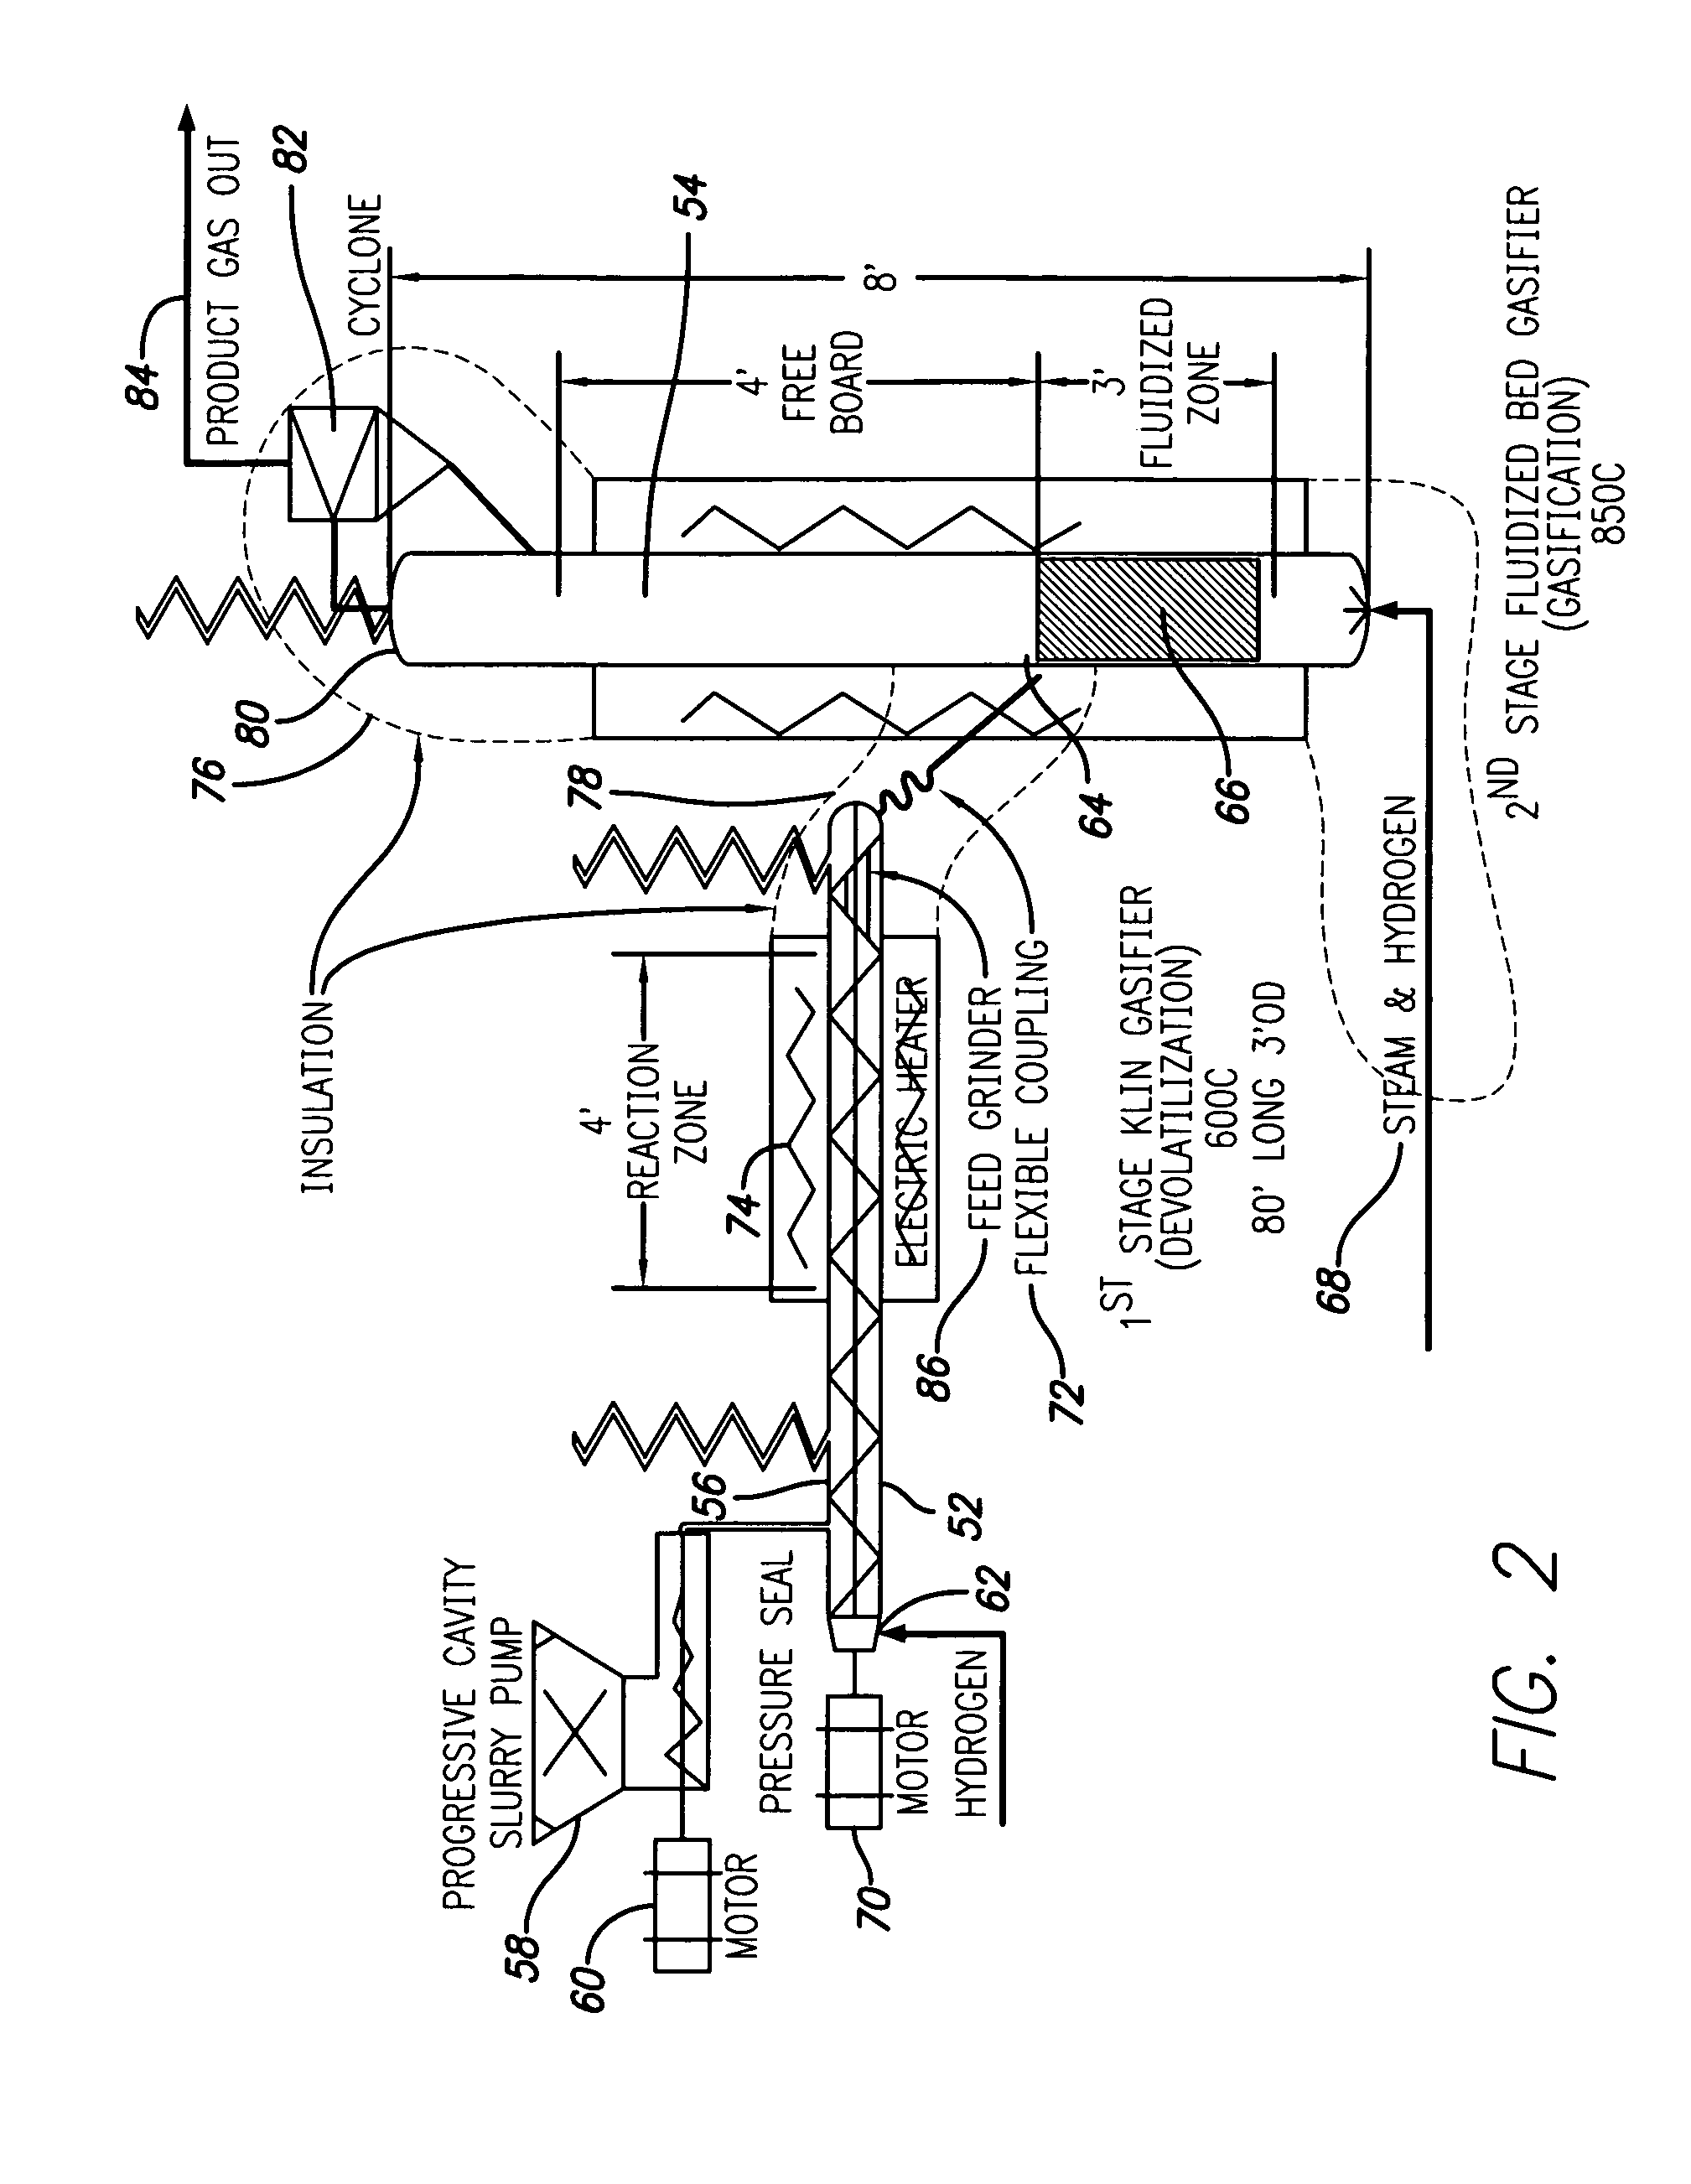 Method and apparatus for steam hydro-gasification in a fluidized bed reactor